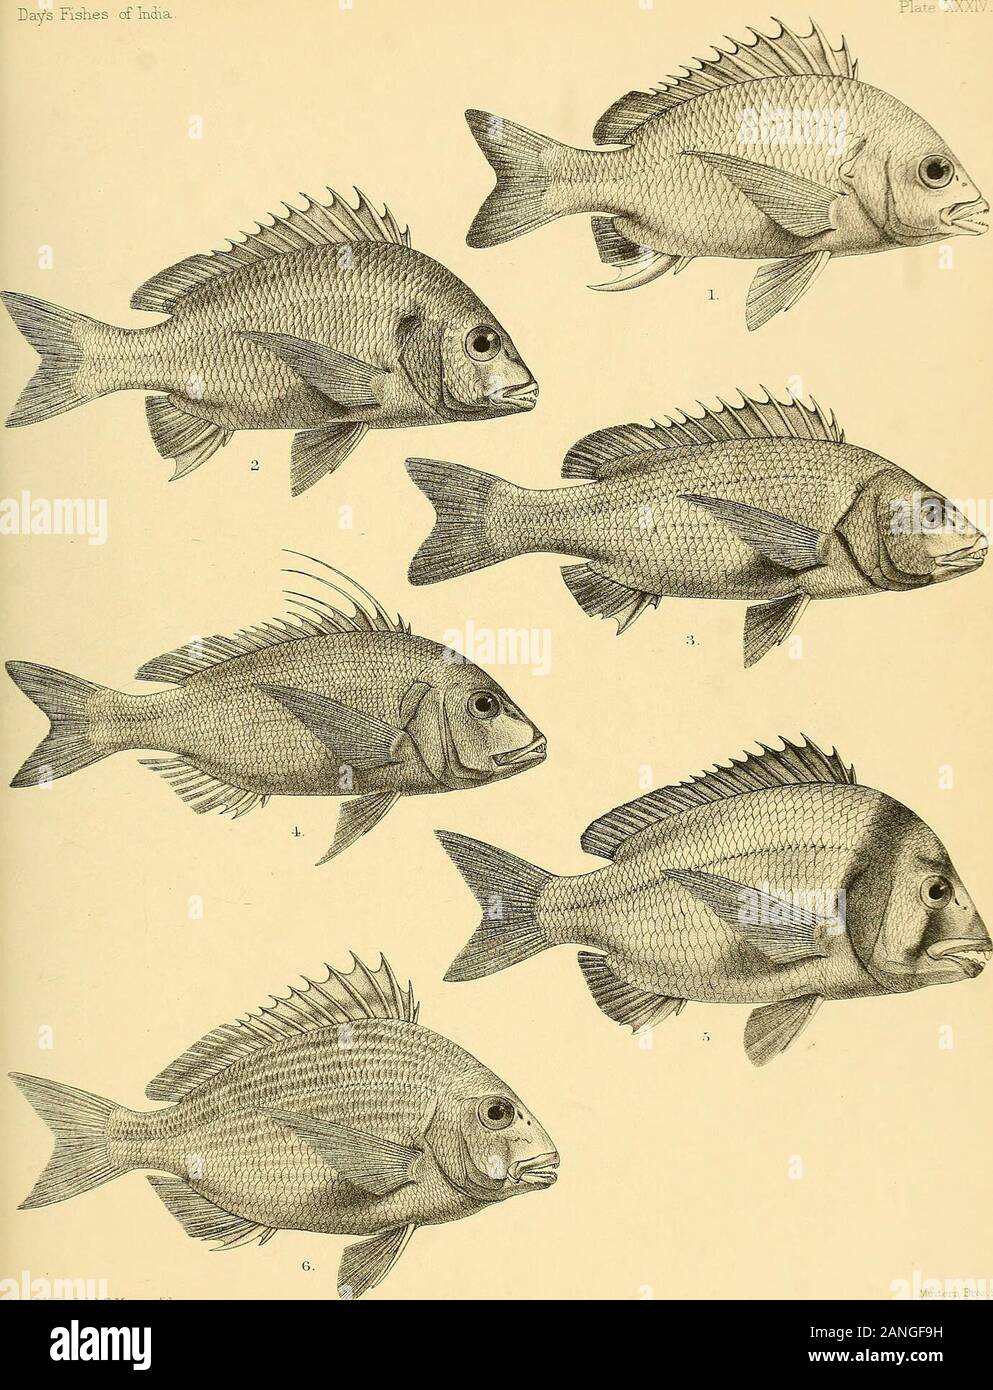 The fishes of India; being a natural history of the fishes known to inhabit the seas and fresh waters of India, Burma, and Ceylon . ftHFard iel.B-Mmtern.Tith. ifeitem 3res .nrro. 1. LETHFJNUS RO STRATUS. 2,L.KARWA. 3.L.HARAK. 4-, L. NEBULOSUS. 5, PAGRUS SPINIFER. Days Fishes of India. G.H.yord de] RBmierri Mh Broi .lira 1 CHRYSOPHRYS BATNIA. 2.C.BERDA. 3.C. CUVIER1. 4, DENTEX NUFAR. 5 CHRYSOPHRYS BIFASCIATA. 6, C. SARBA. Days Fishes of India. Plate . Stock Photo